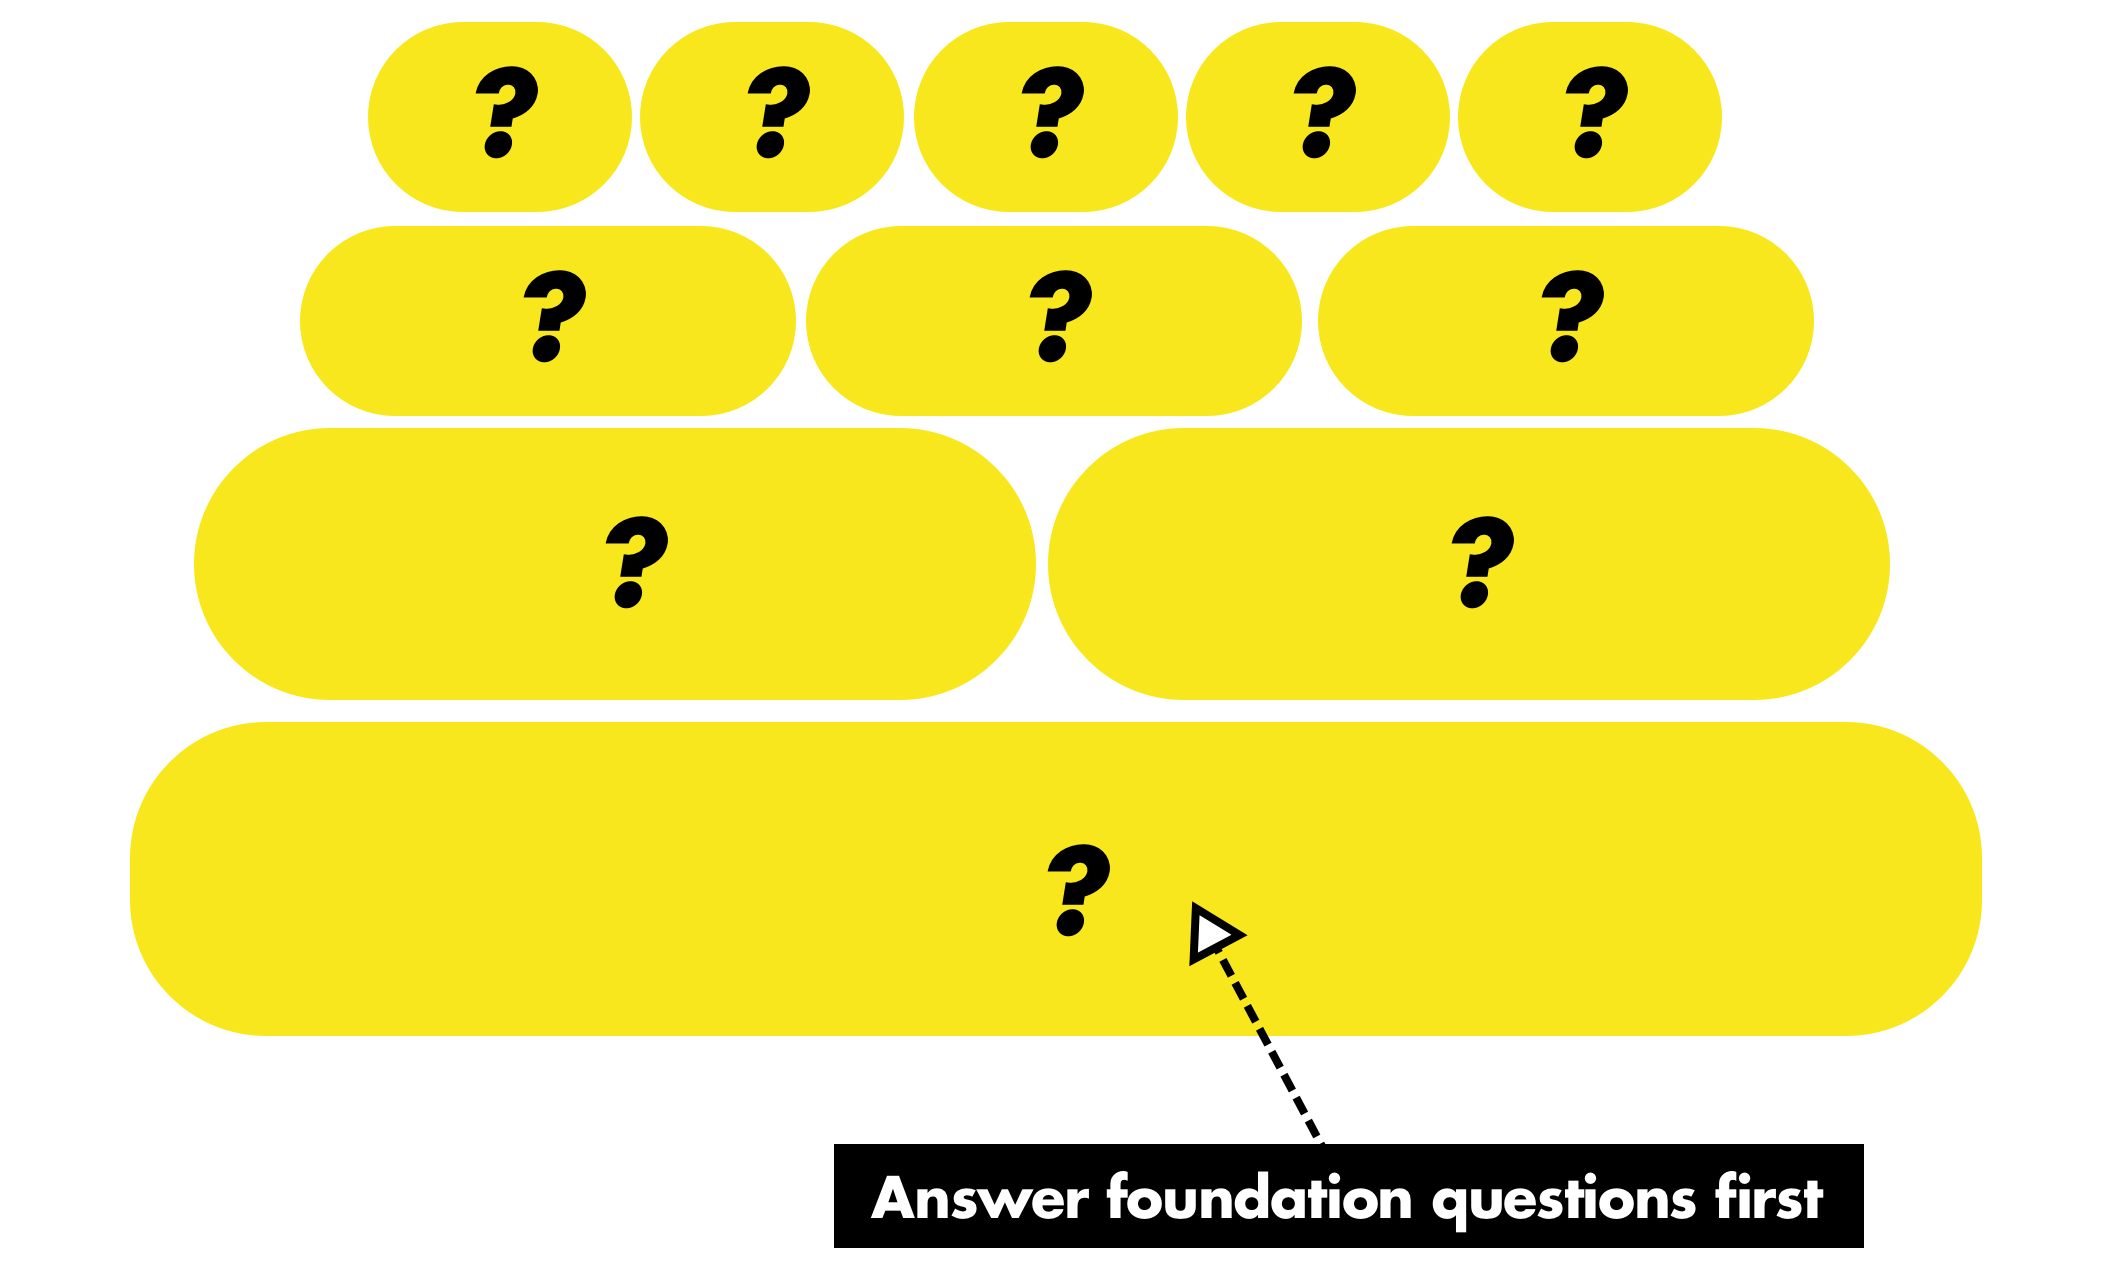 A stack of blocks with question marks. An arrow points to the bottom block with the label 'answer foundation questions first'.